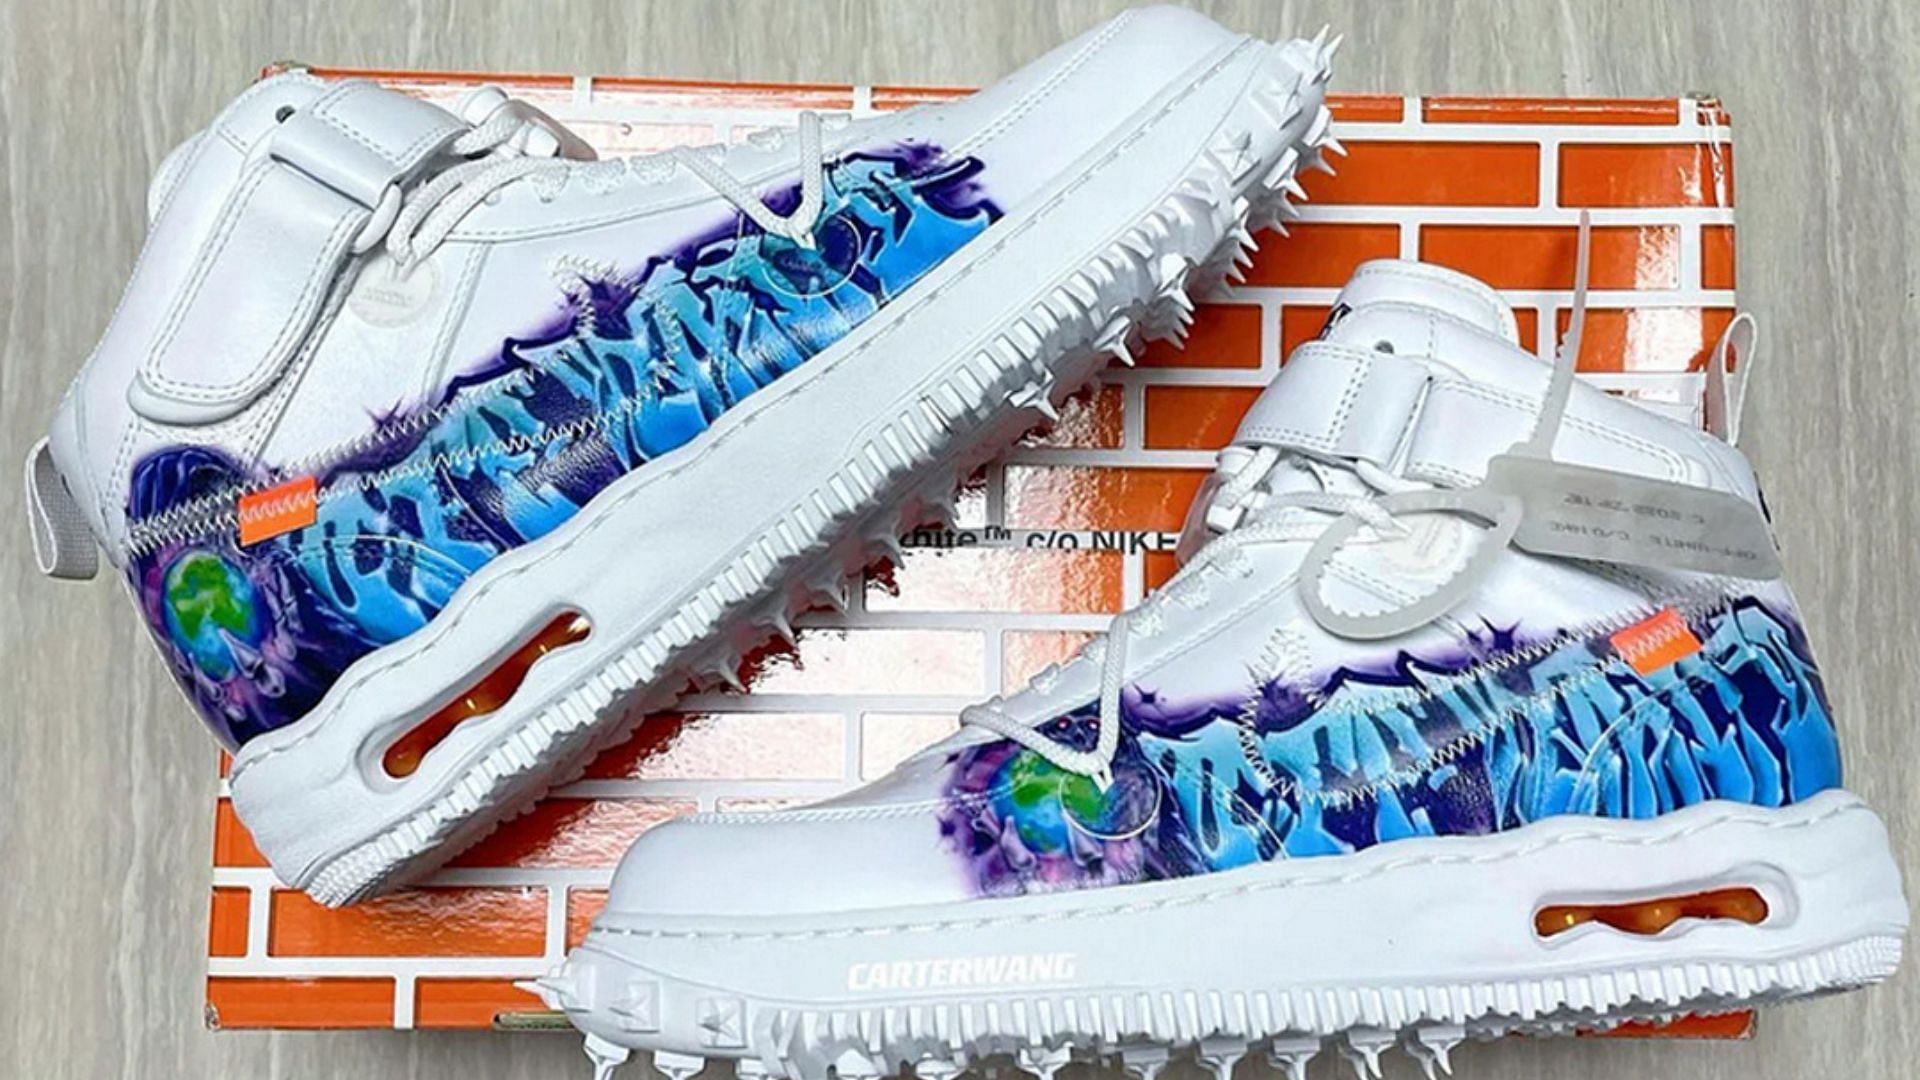 Virgil Abloh Teases New Off-White x Nike Colabs via Interactive